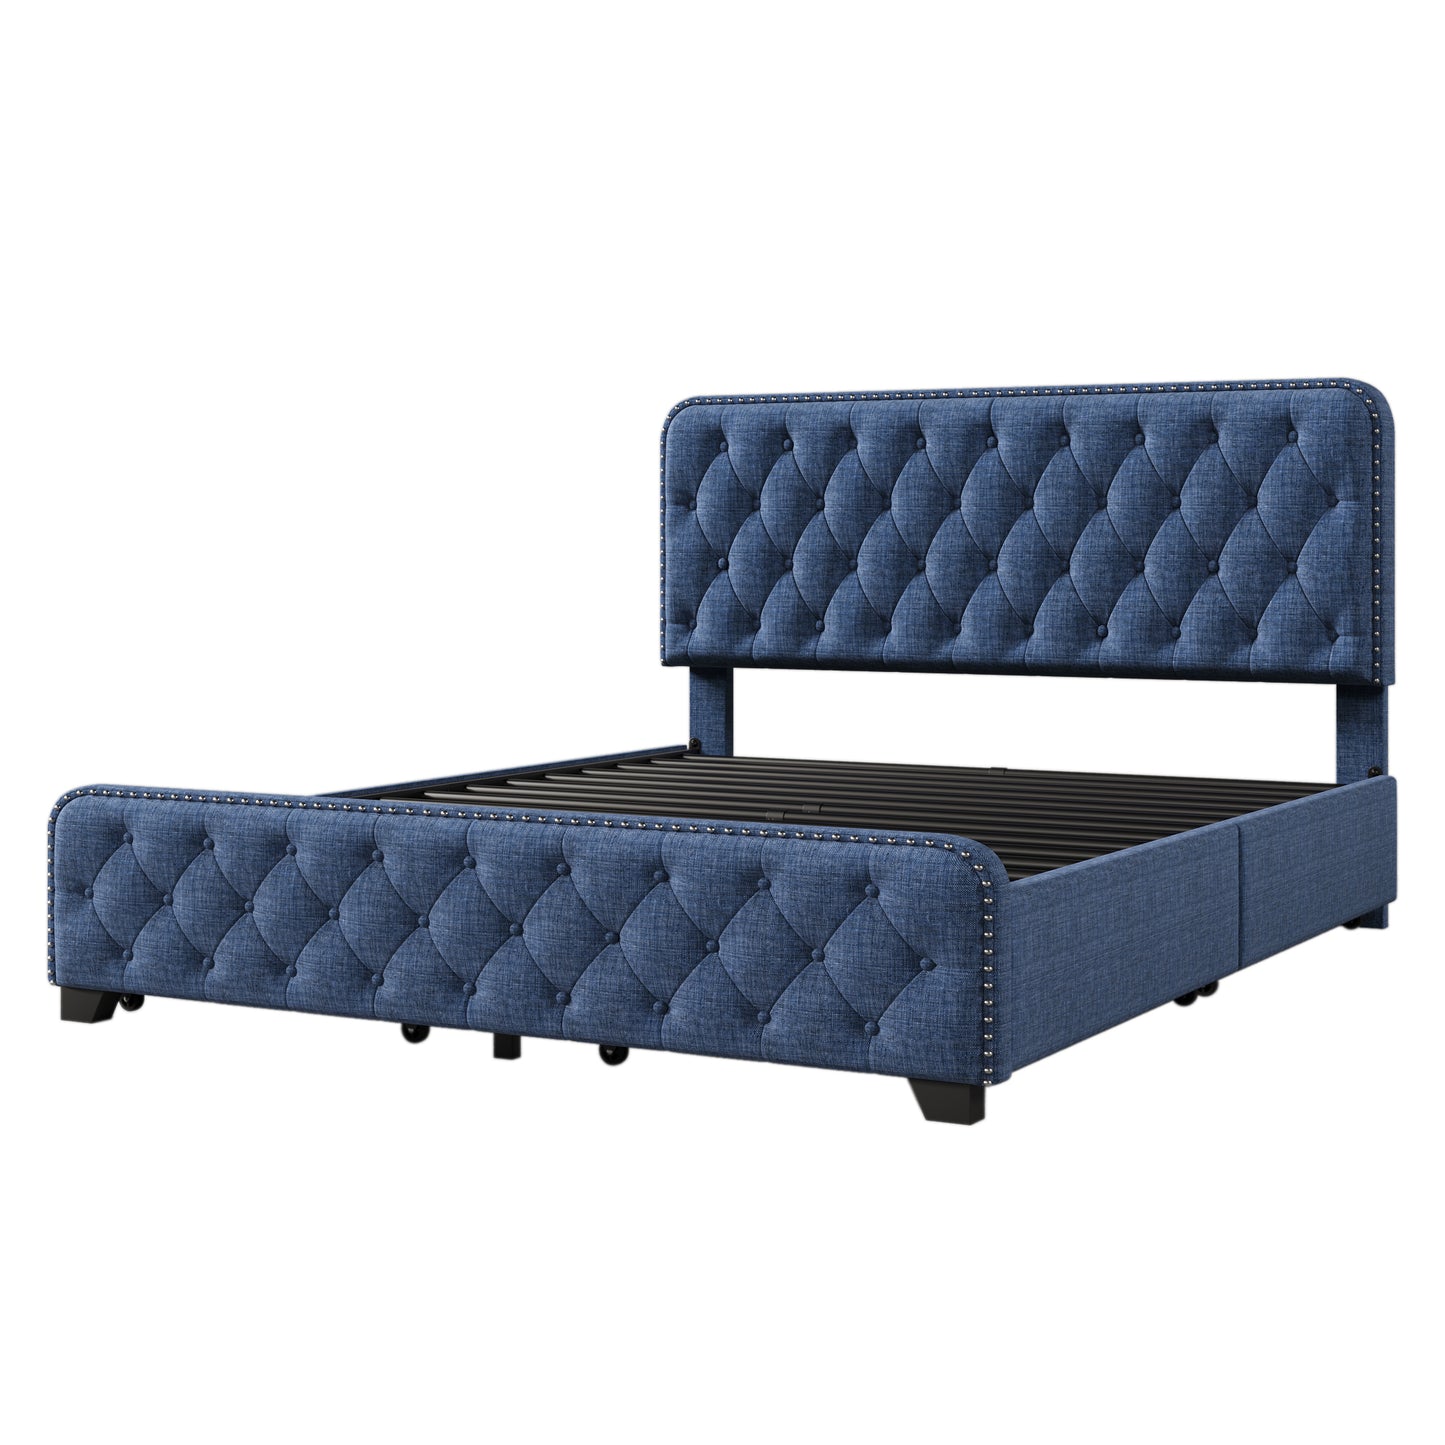 Upholstered Platform Bed Frame with Four Drawers, Button Tufted Headboard and Footboard Sturdy Metal Support, No Box Spring Required, Blue, Queen